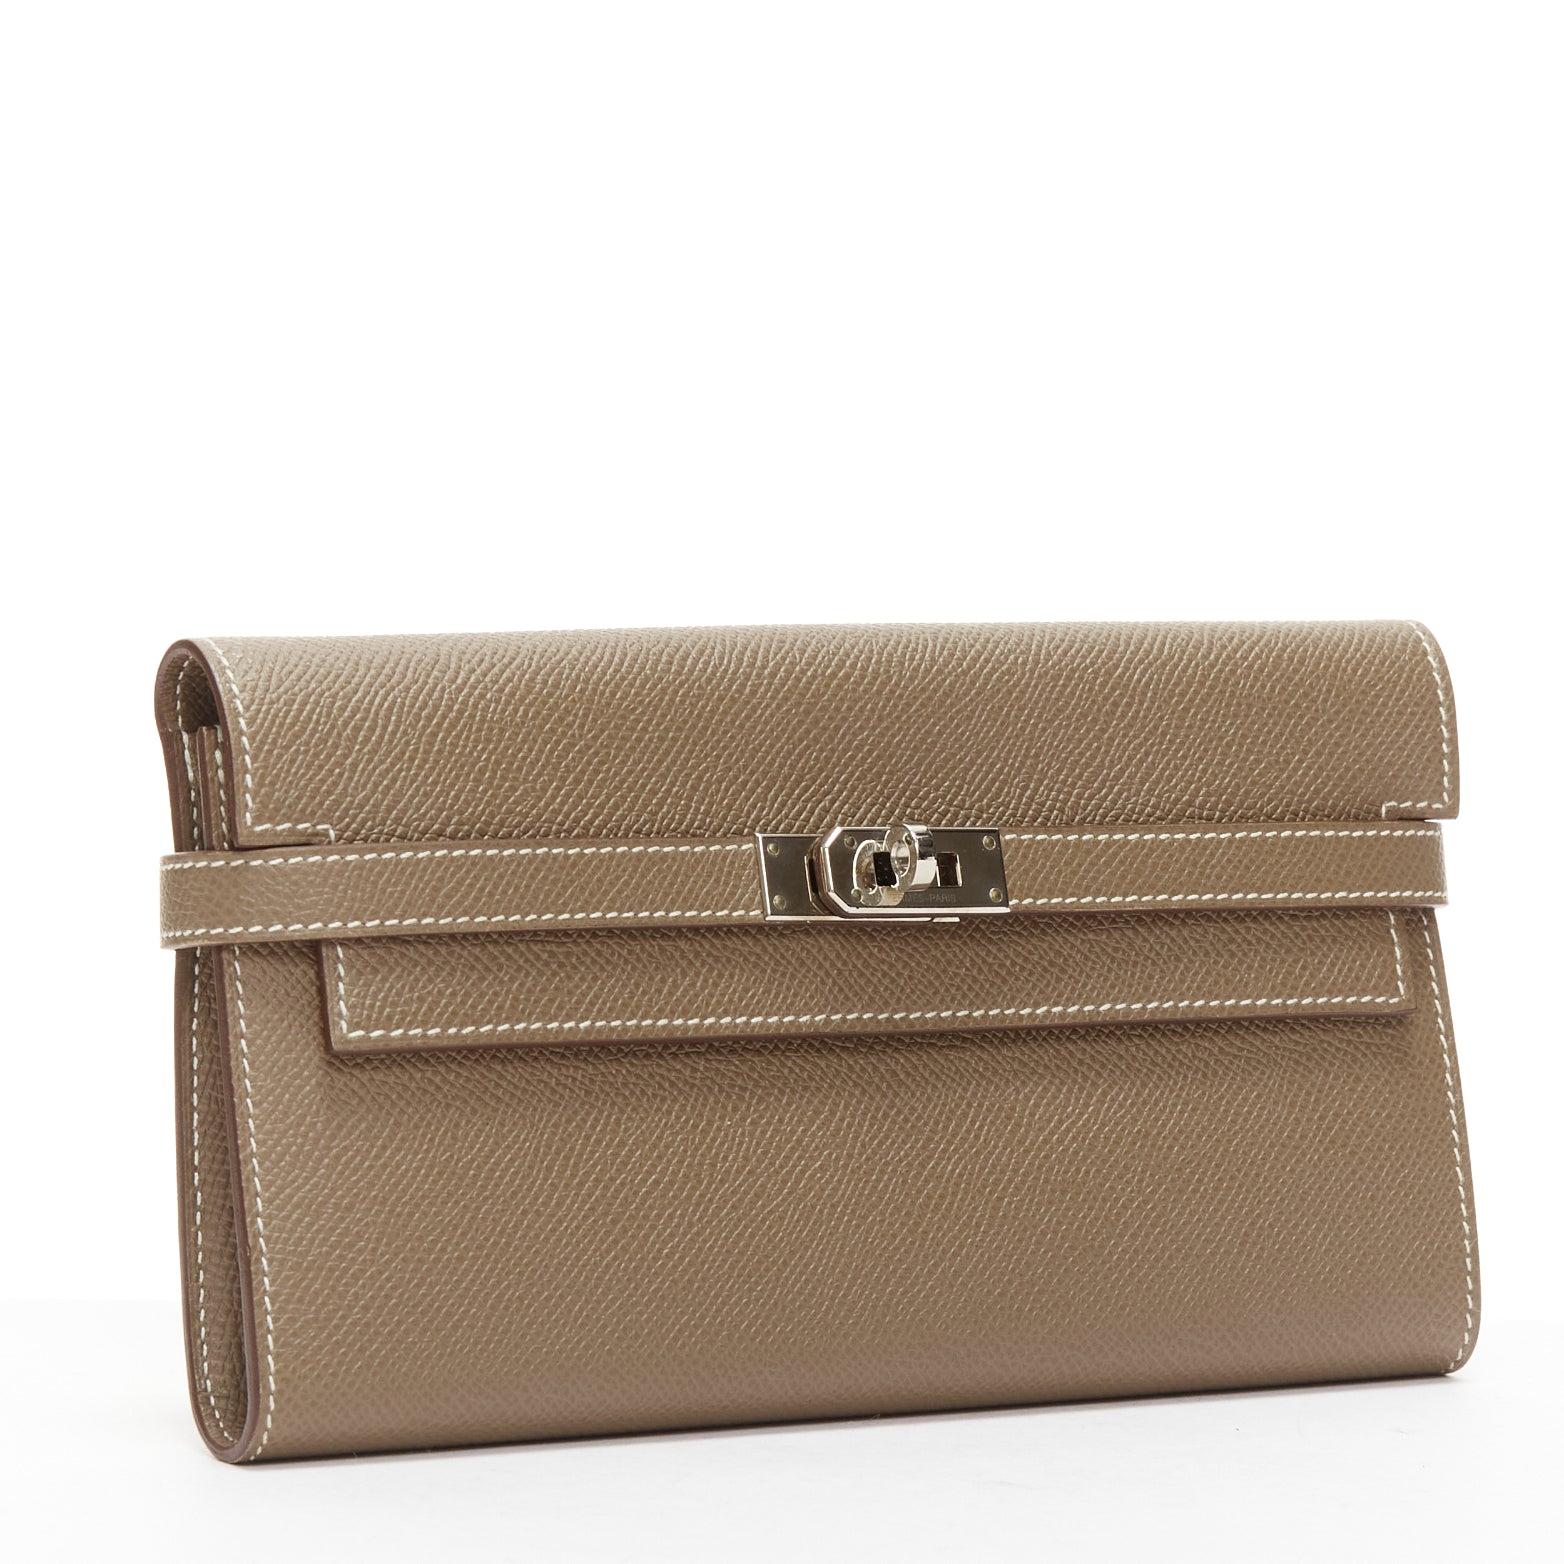 HERMES Kelly Longue taupe togo leather silver turnlock flap long wallet
Reference: KYCG/A00039
Brand: Hermes
Model: Kelly Longue Wallet
Material: Leather
Color: Khaki, Silver
Pattern: Solid
Closure: Turnlock
Lining: Taupe Leather
Extra Details: